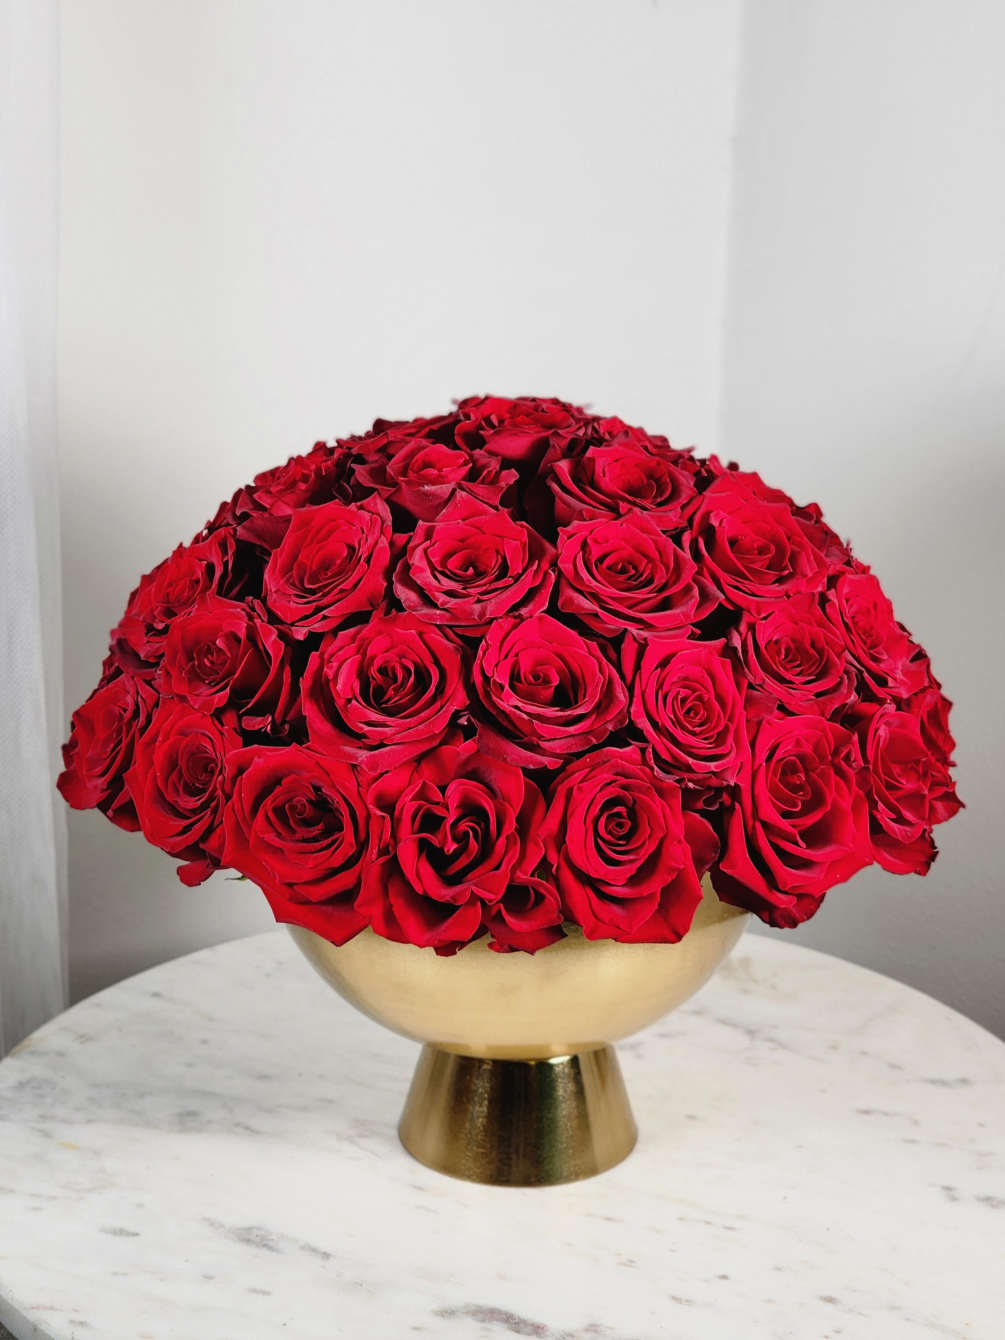 Red roses are recognized queens of the flower world. Passionate and sensual